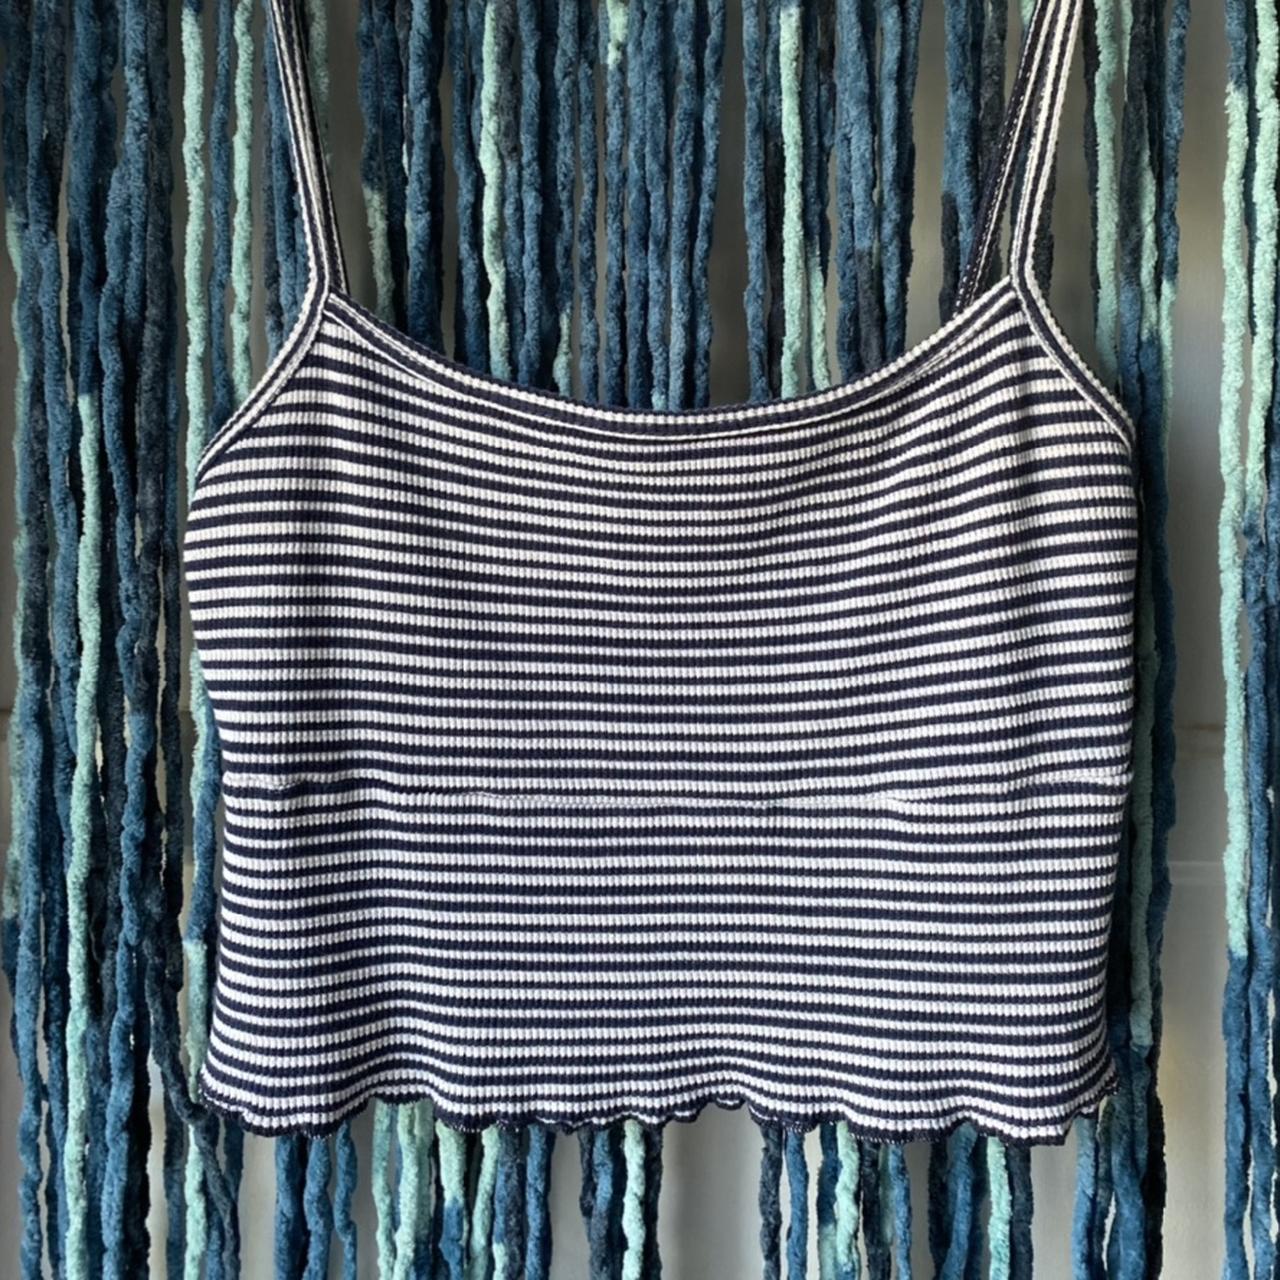 Brandy Melville navy blue and white tank